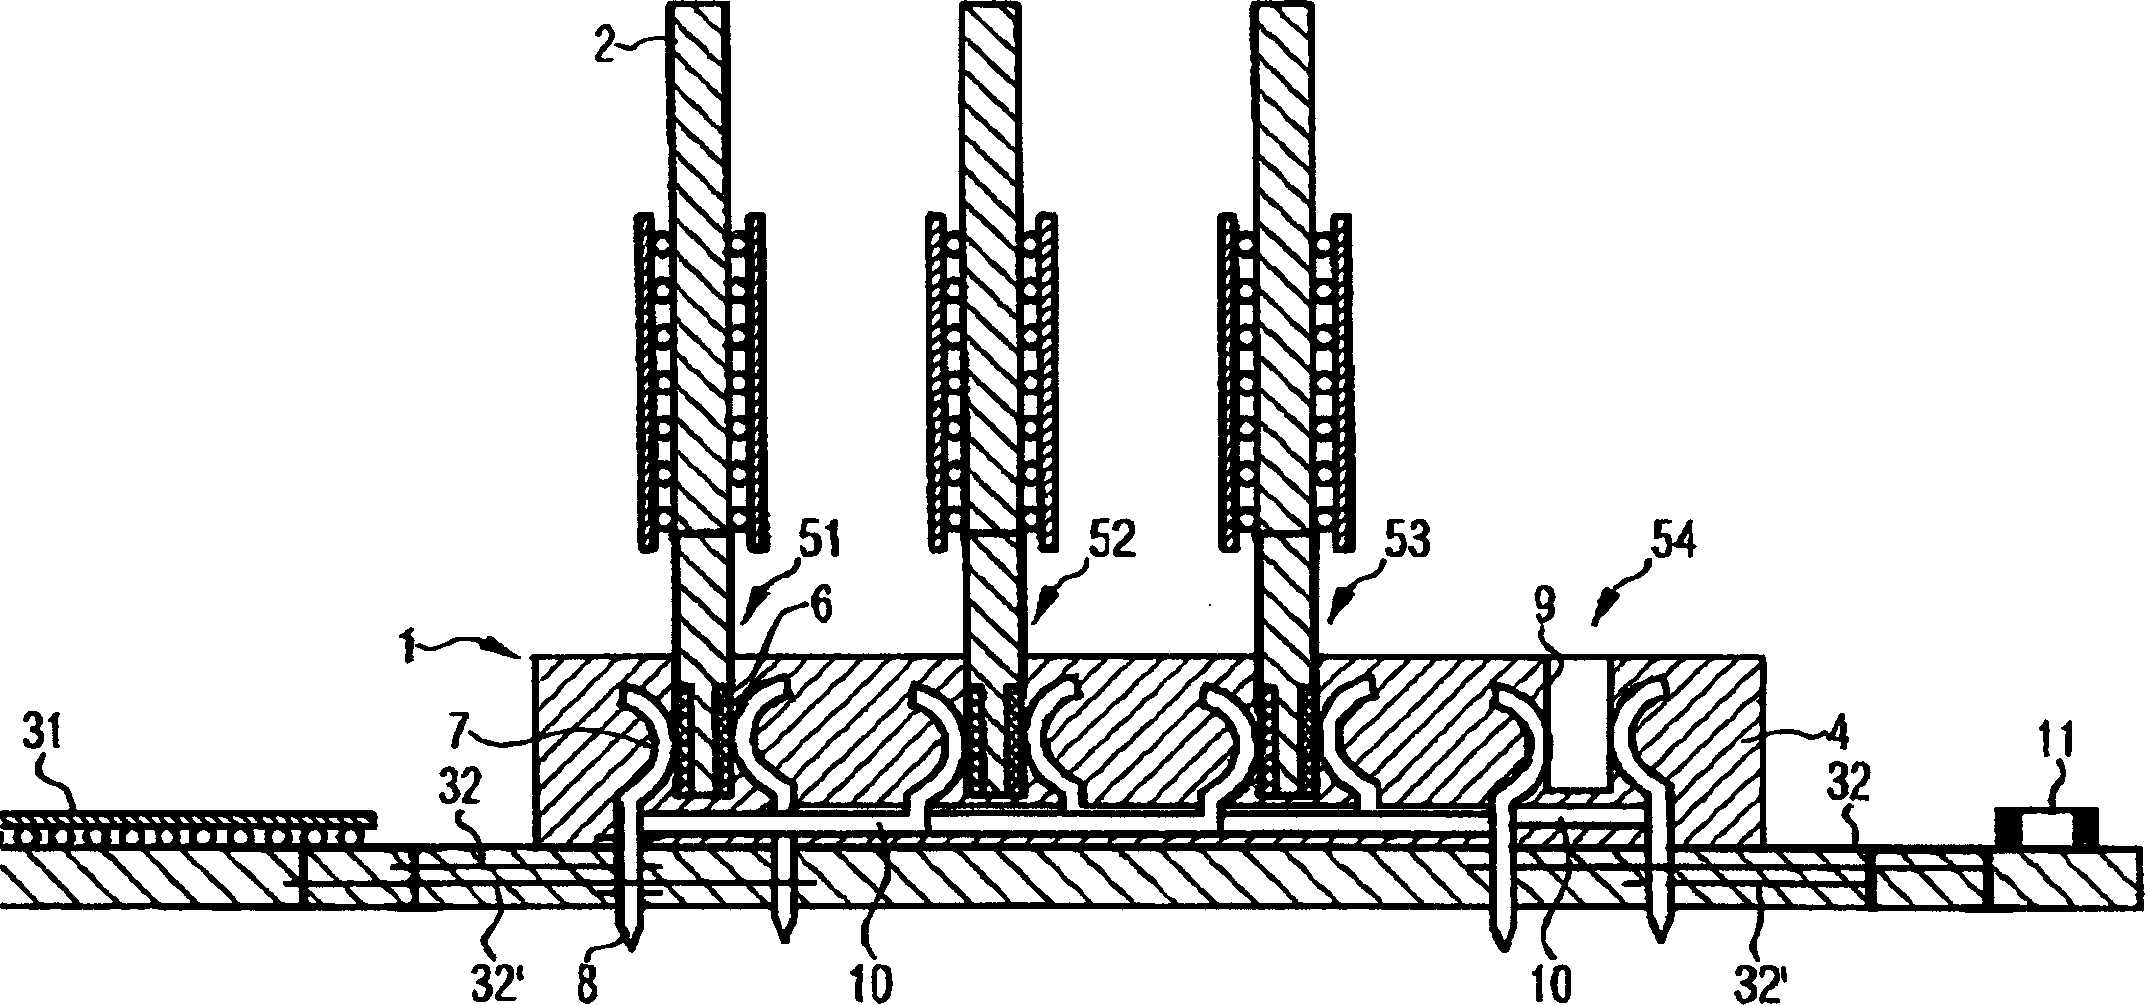 Connector with plural switching assemblies of compatible interface